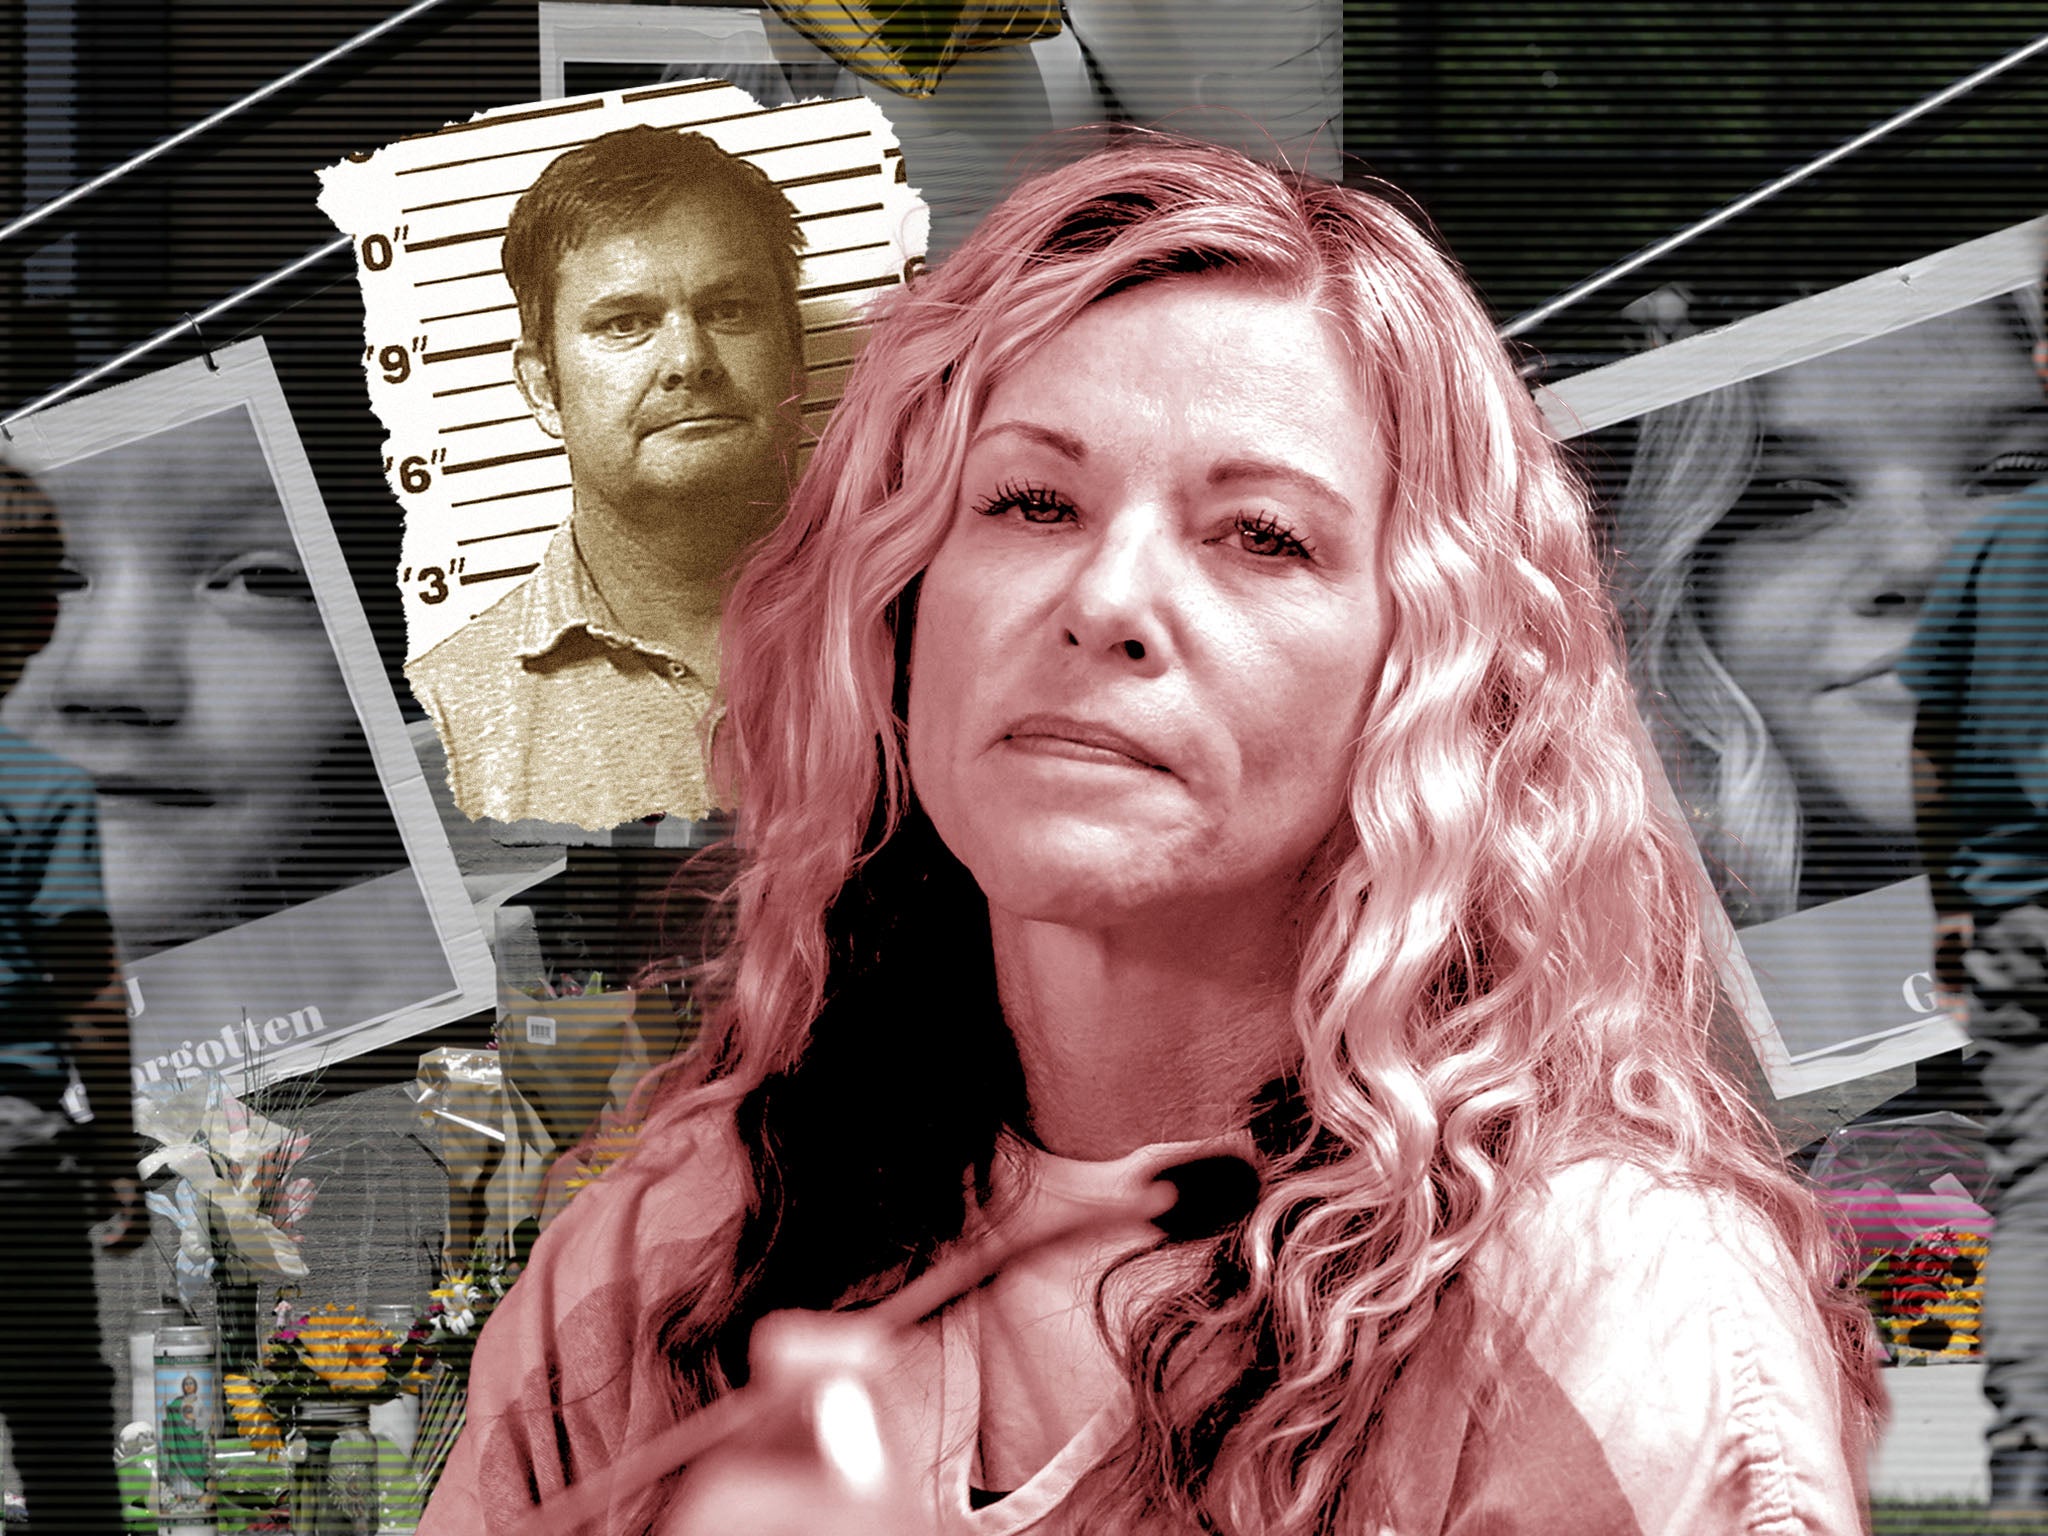 Lori Vallow – infamously dubbed the ‘cult mom’ – was found guilty of first-degree murder, conspiracy to commit first-degree murder and grand theft over the deaths of her daughter and son